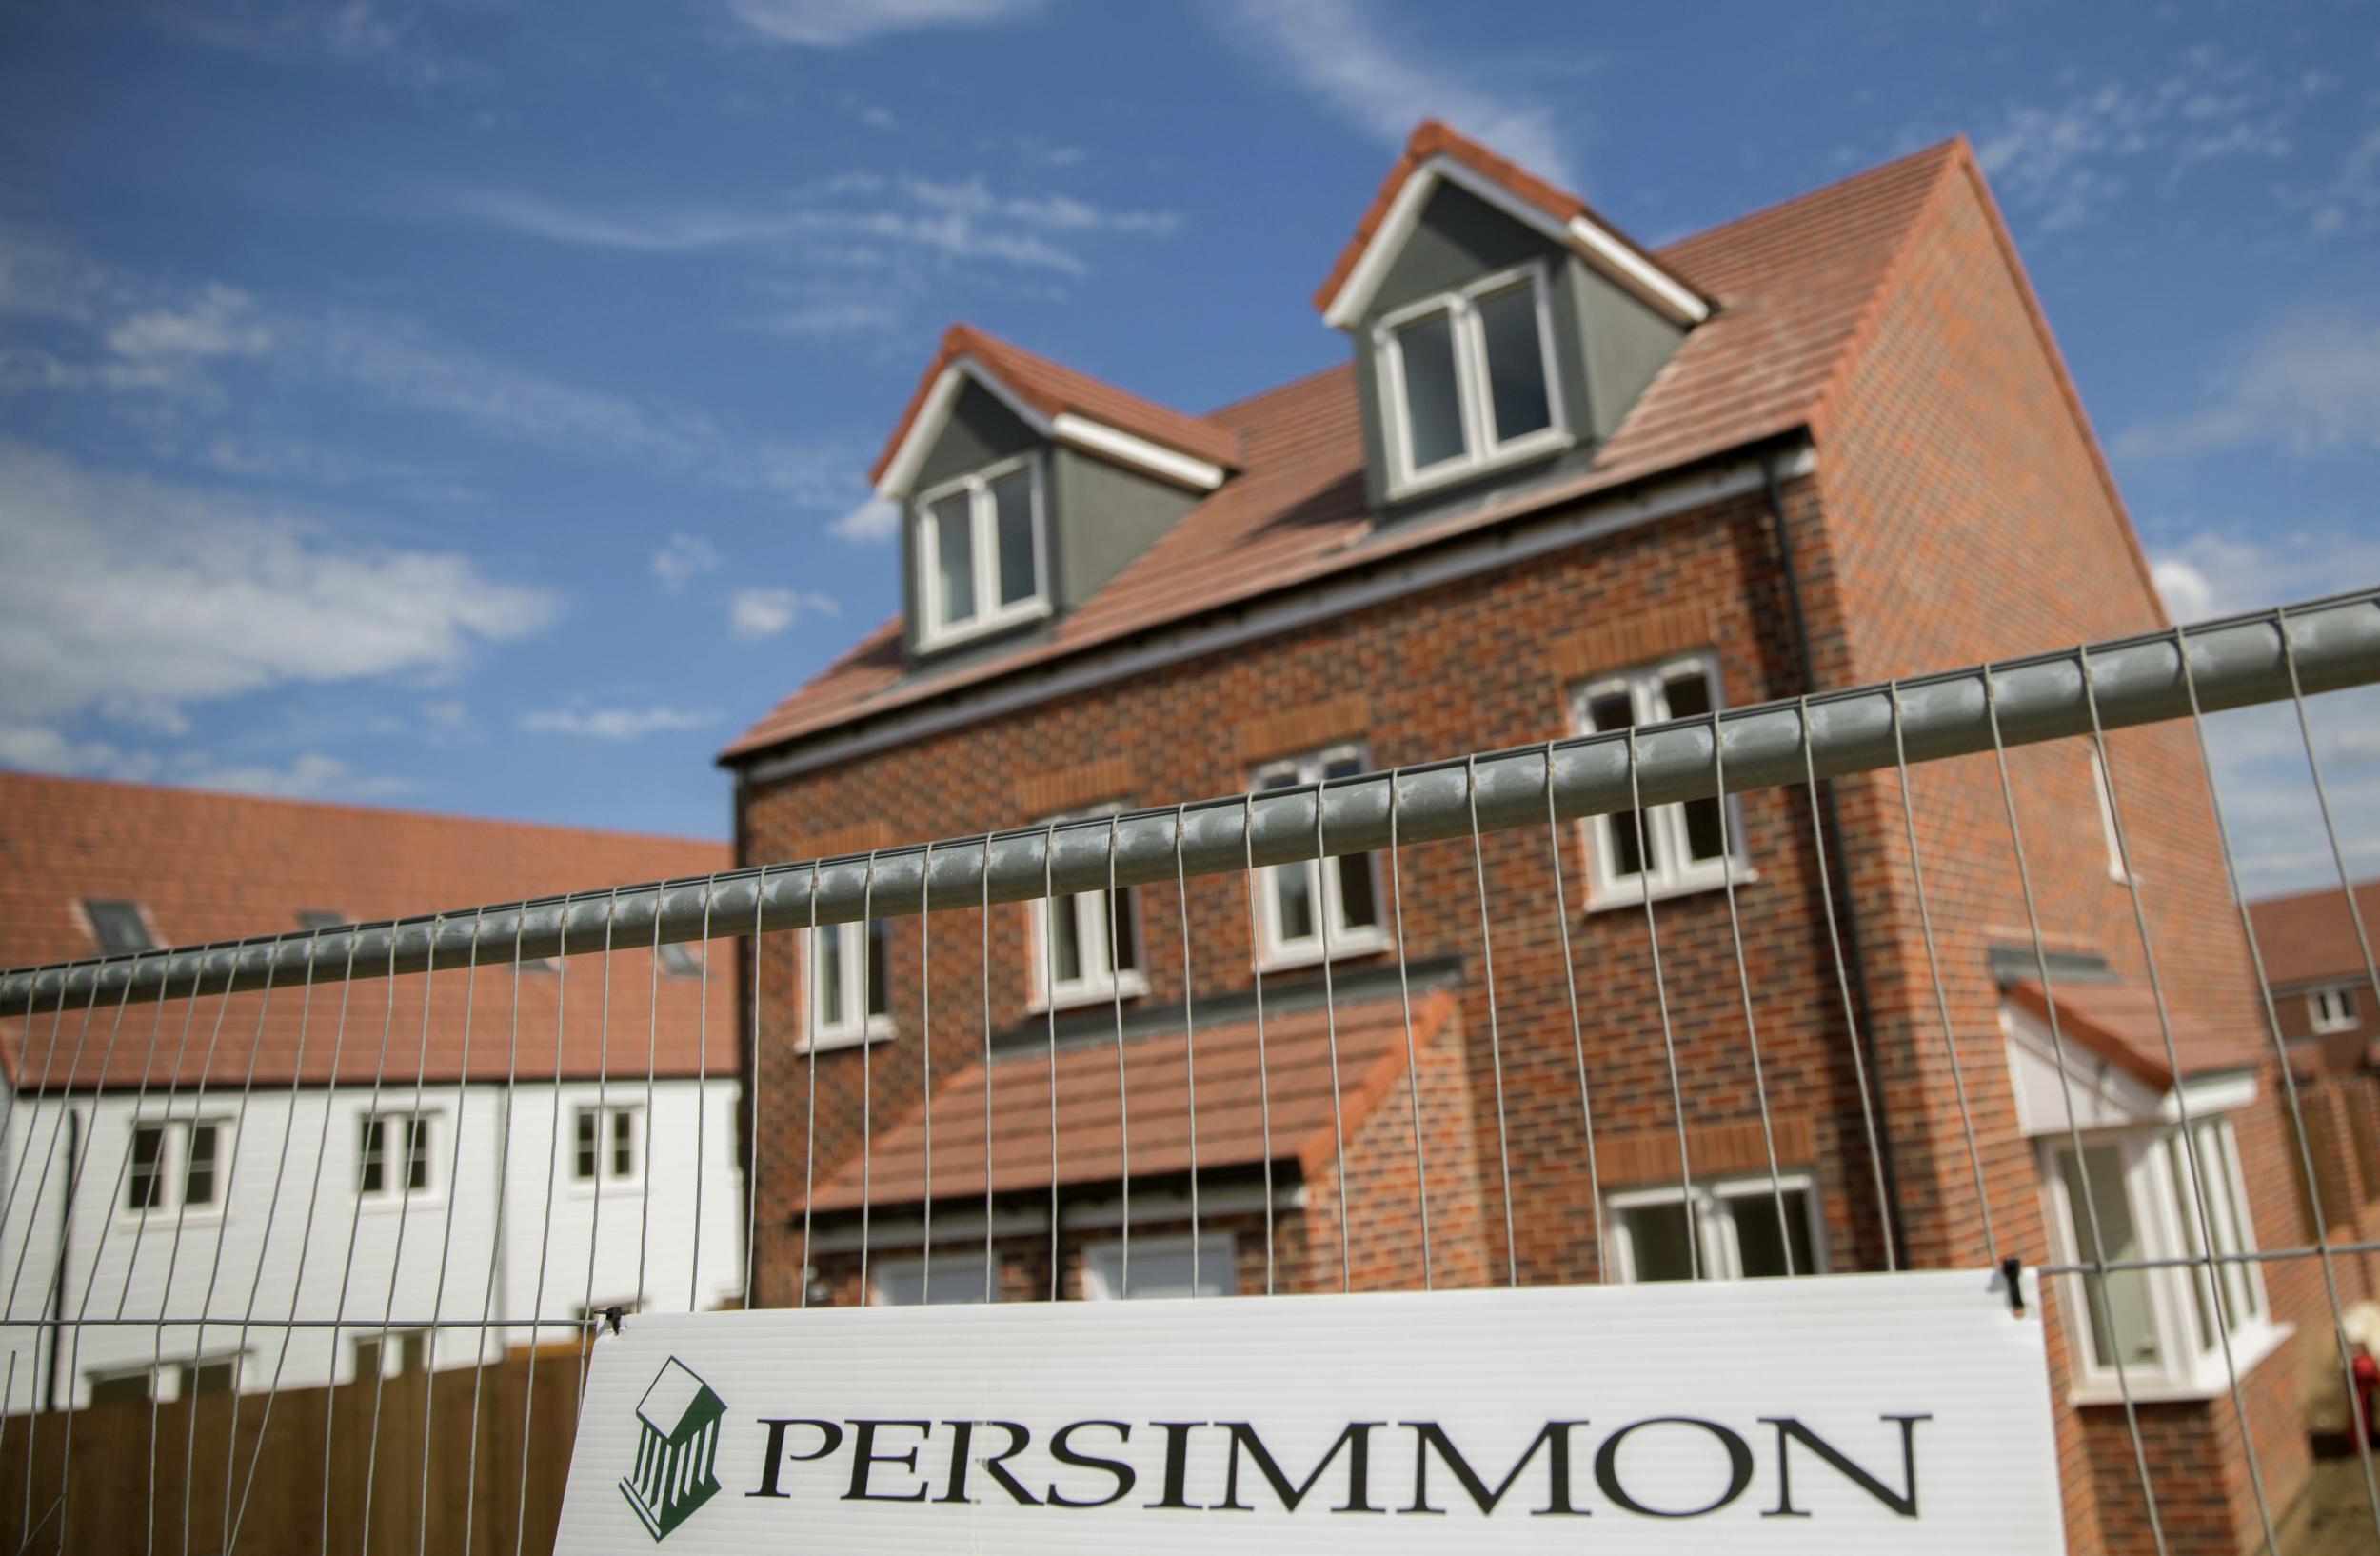 Persimmon: The scandal hit housebuilder has reported a £1.1bn profit